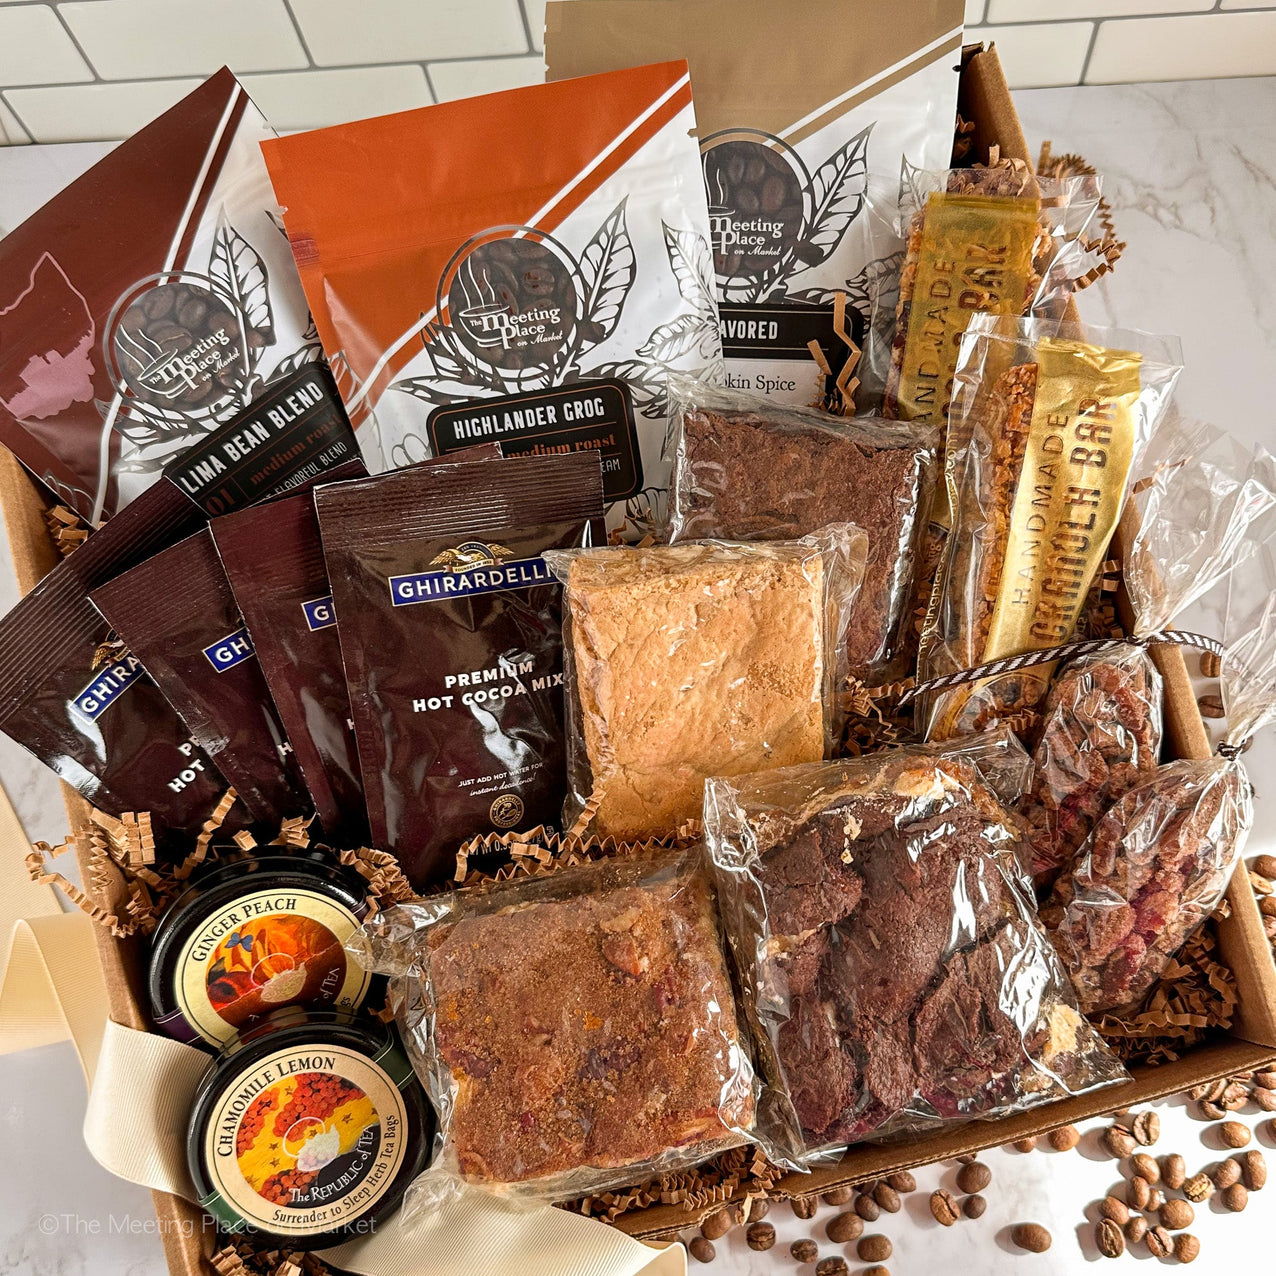 Thanksgiving Family & Friends Gift Basket with Coffee, Tea, Cocoa, Brownies, Granola Fall / Autumn Gifts - The Meeting Place on Market